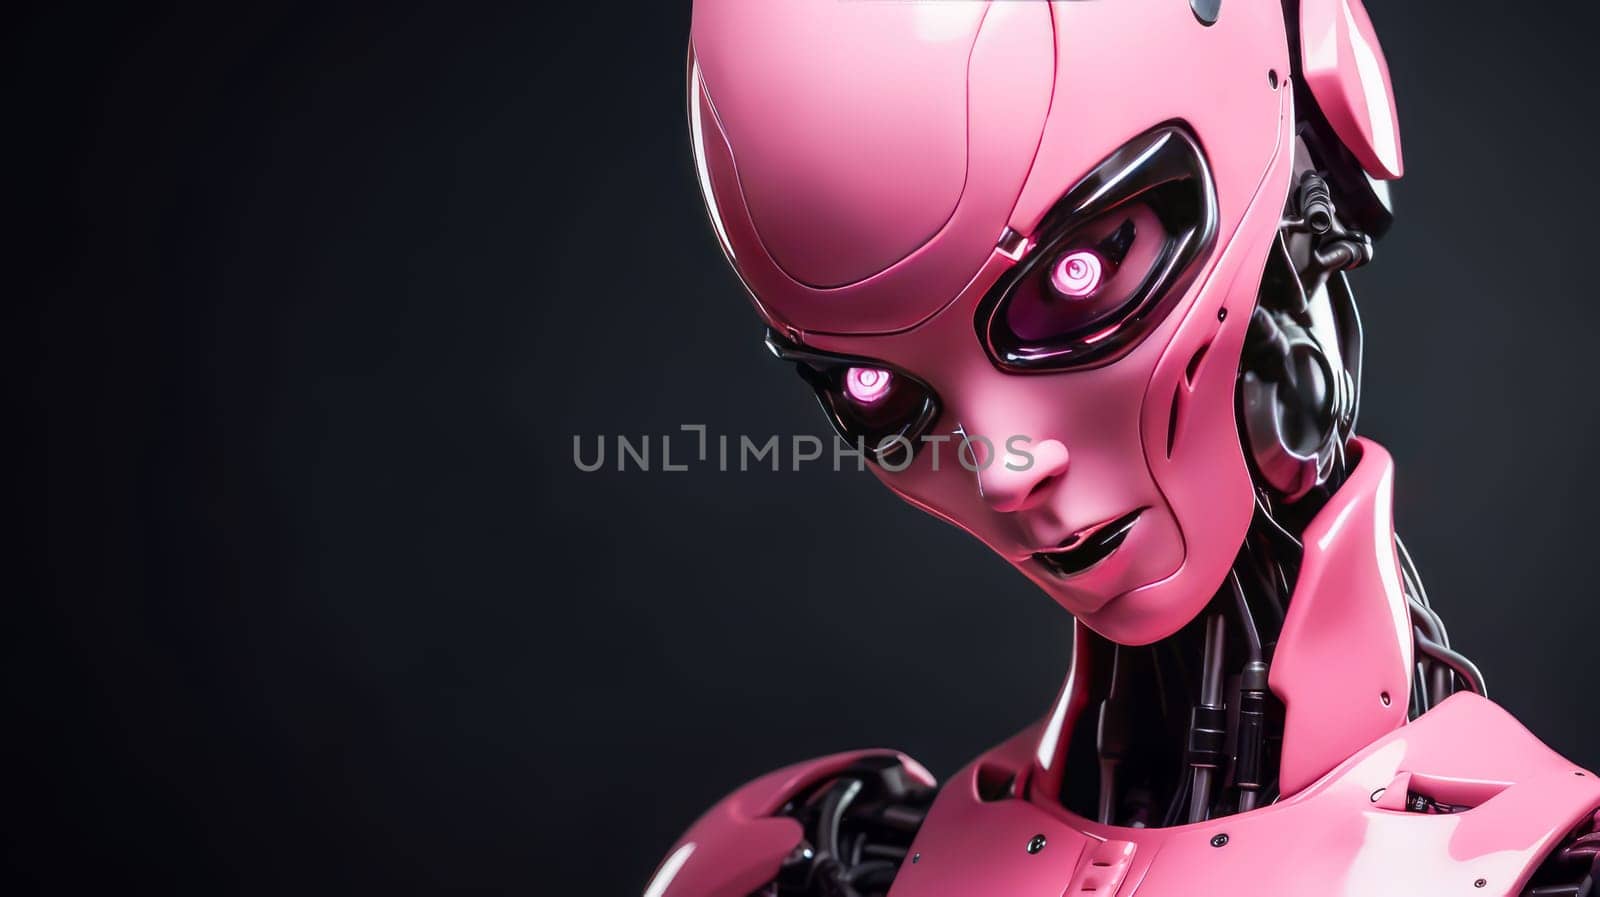 Evil pink robot with artificial intelligence, future technology on a black background. Internet and digital technologies. Global network. Integrating technology and human interaction. Chat bot. Digital technologies of the future